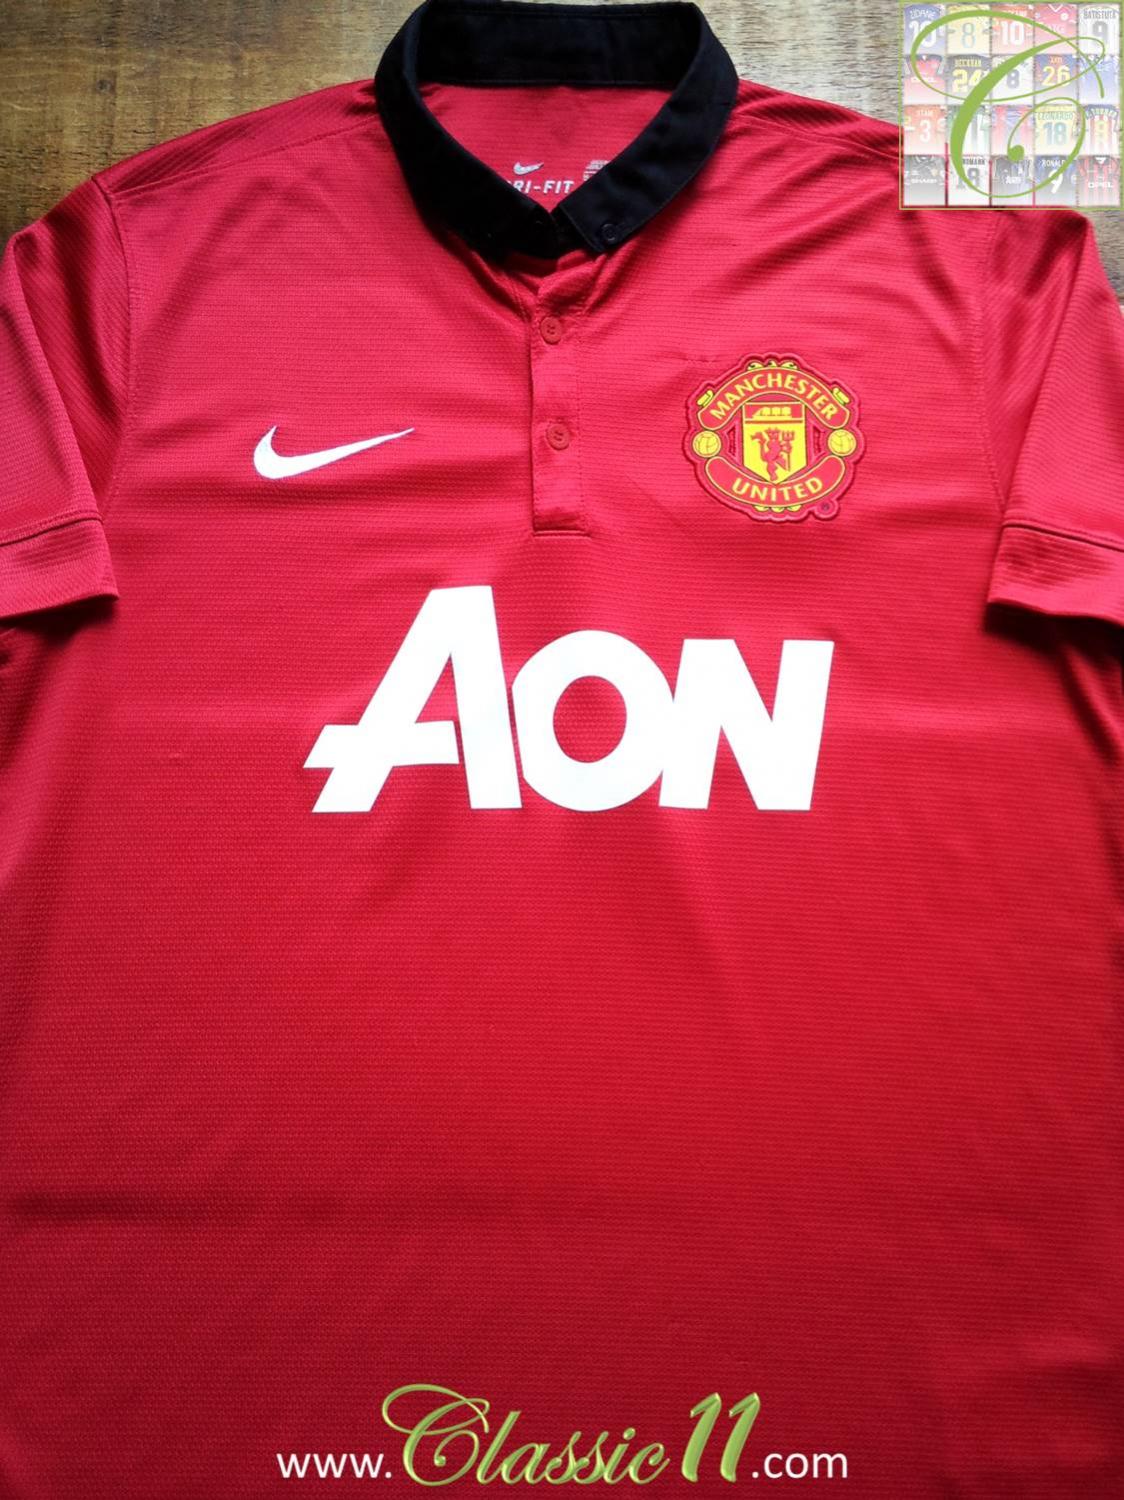 Manchester United Home football shirt 2013 - 2014. Sponsored by AON